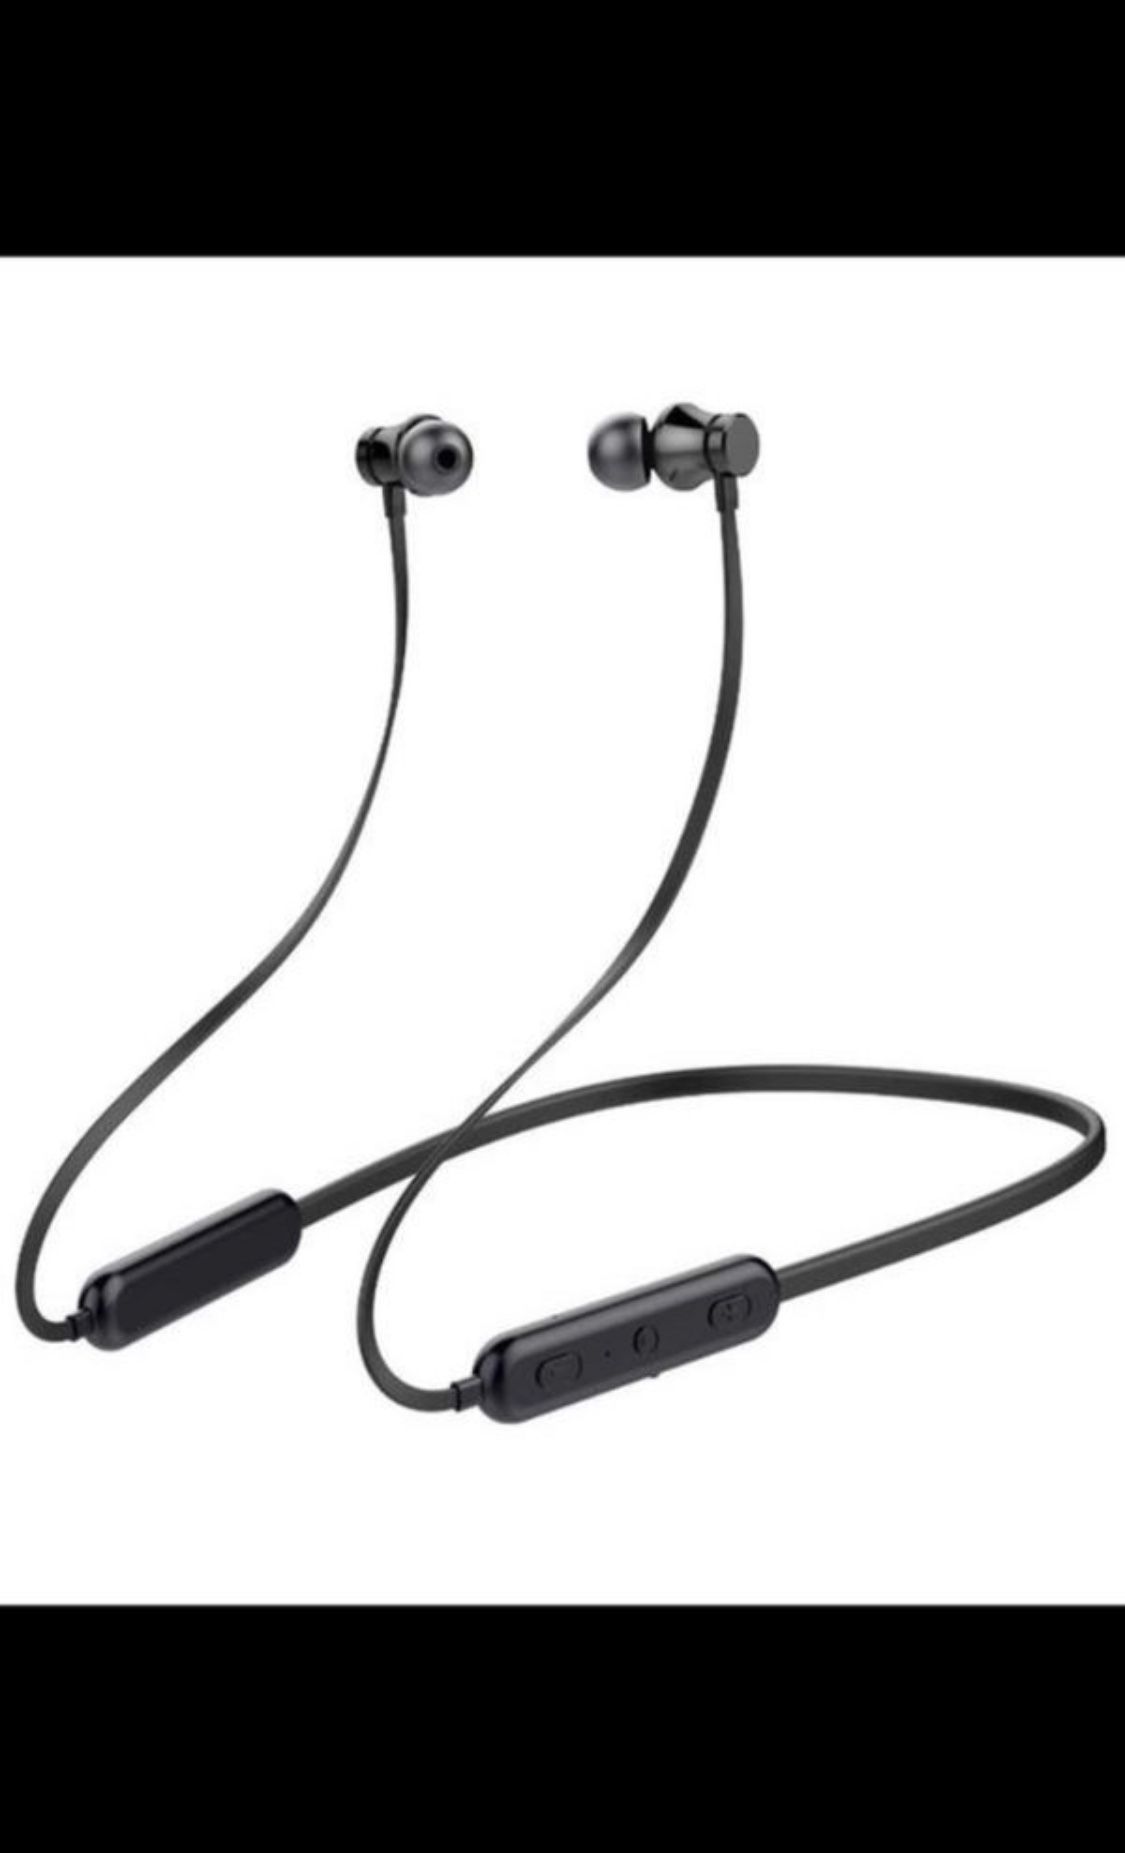 Brand new wireless Bluetooth Headphones, 20Hrs Playtime,Sport / Gym Running, w/mic, Compatible with iPhone and Android (Black)